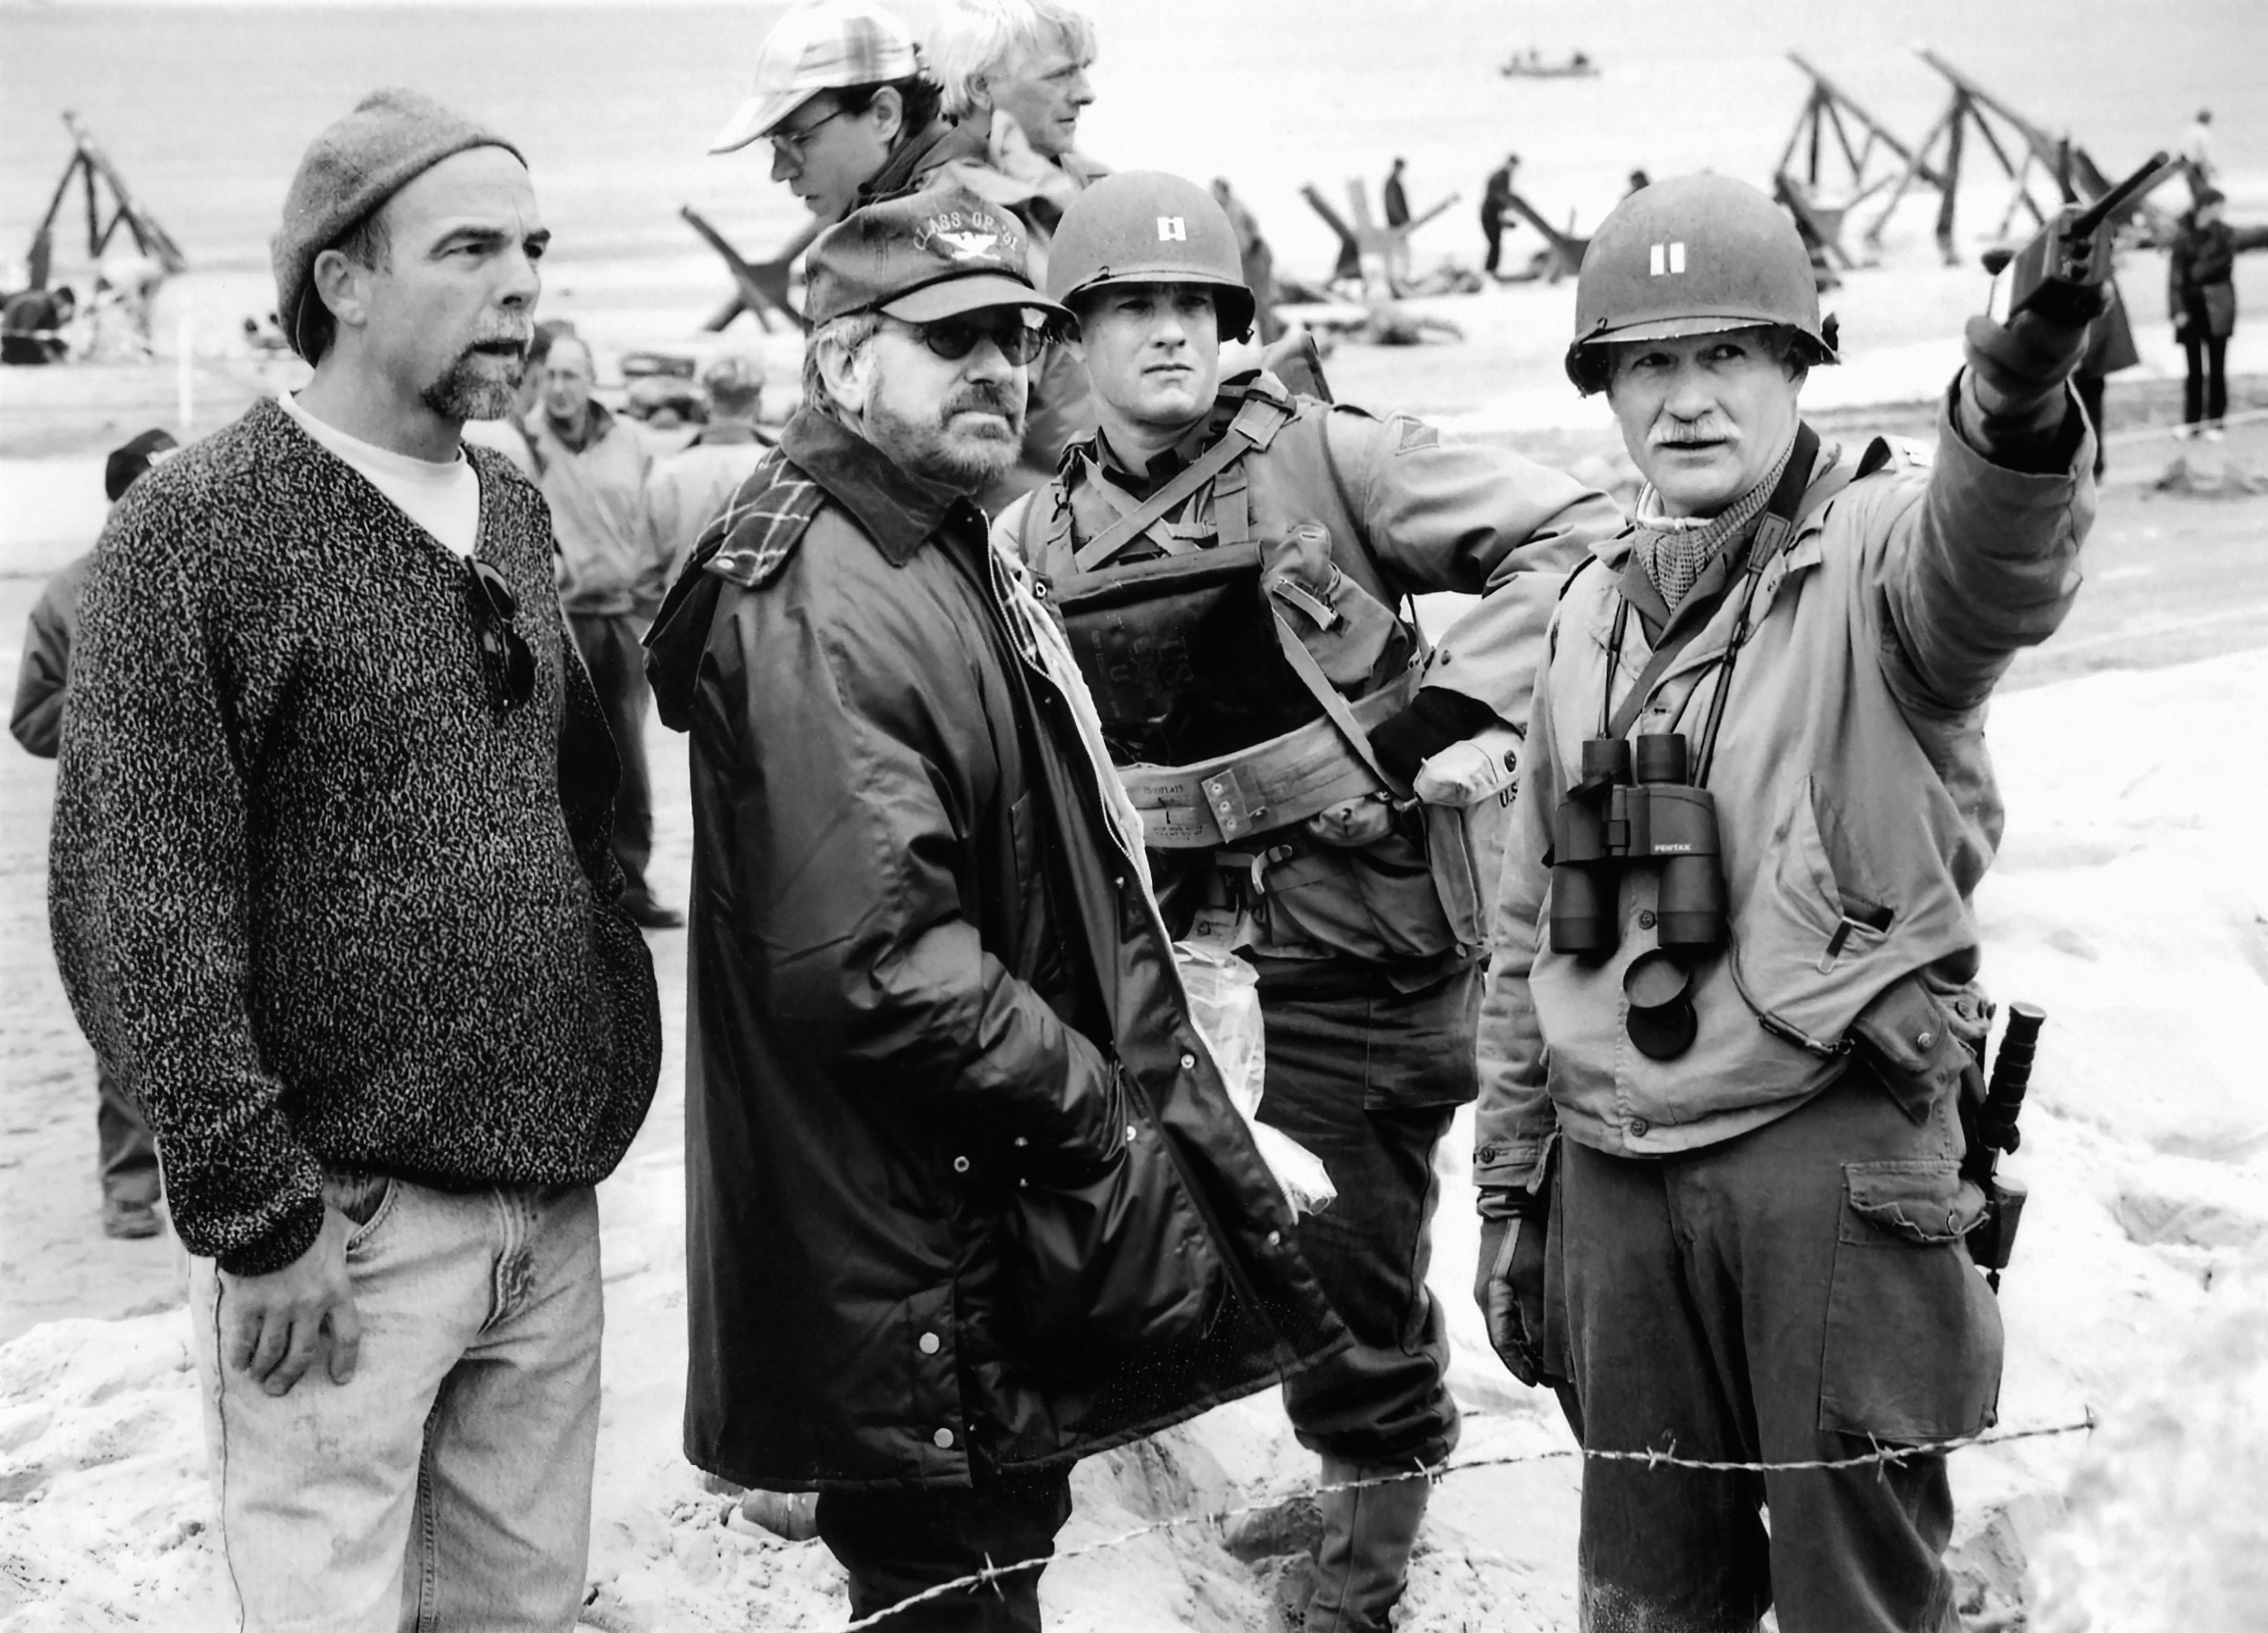 <p>Marine veteran Dale Dye and his company Warriors Inc. were the ones who handled the training for the cast of <em>Saving Private Ryan</em>. That was not all he did for the movie. Dye plays an unnamed war department colonel in the film.</p><p><a href='https://www.msn.com/en-us/community/channel/vid-cj9pqbr0vn9in2b6ddcd8sfgpfq6x6utp44fssrv6mc2gtybw0us'>Follow us on MSN to see more of our exclusive entertainment content.</a></p>